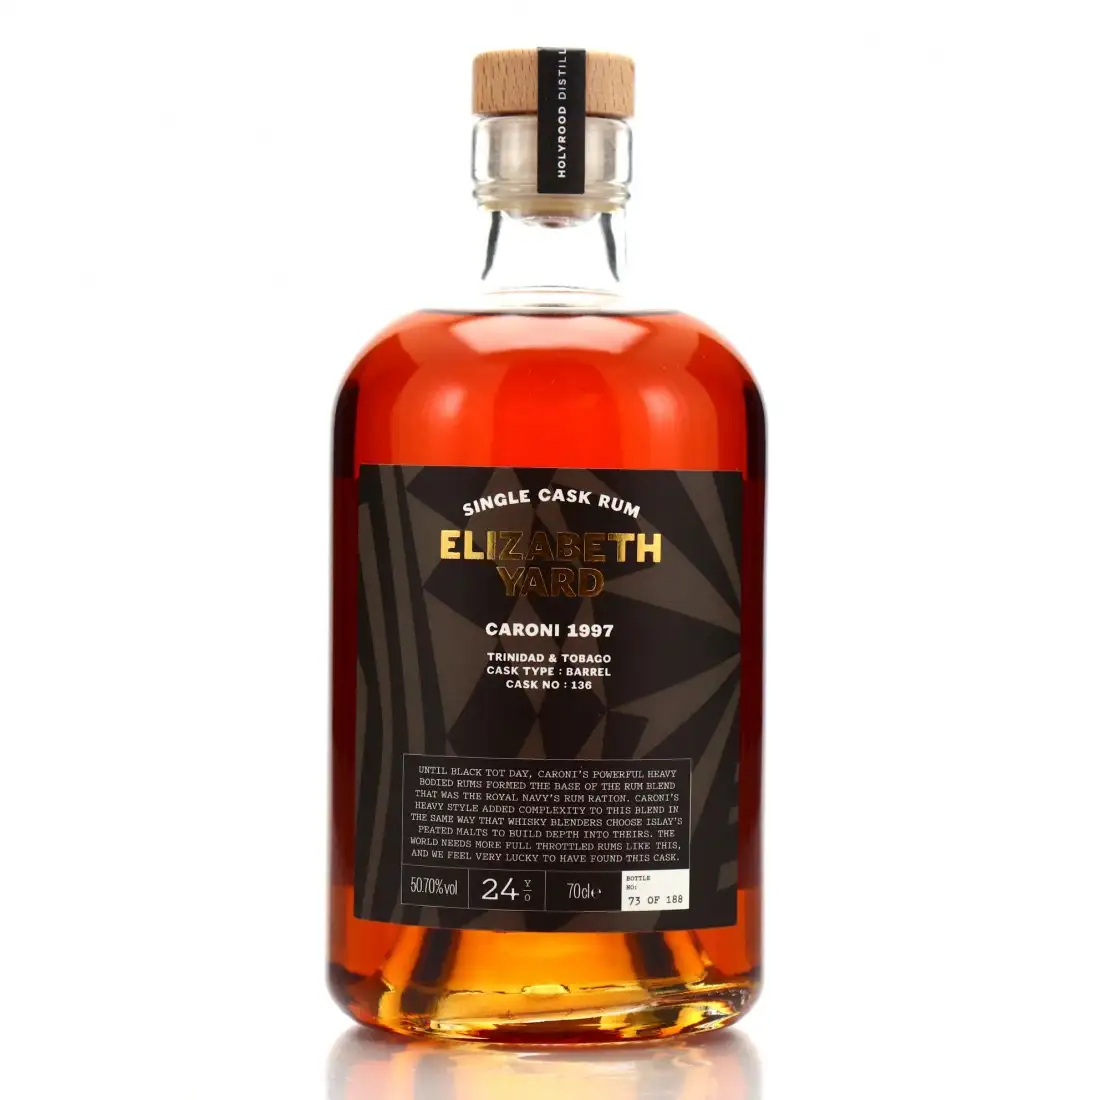 Image of the front of the bottle of the rum Elizabeth Yard Single Cask Rum